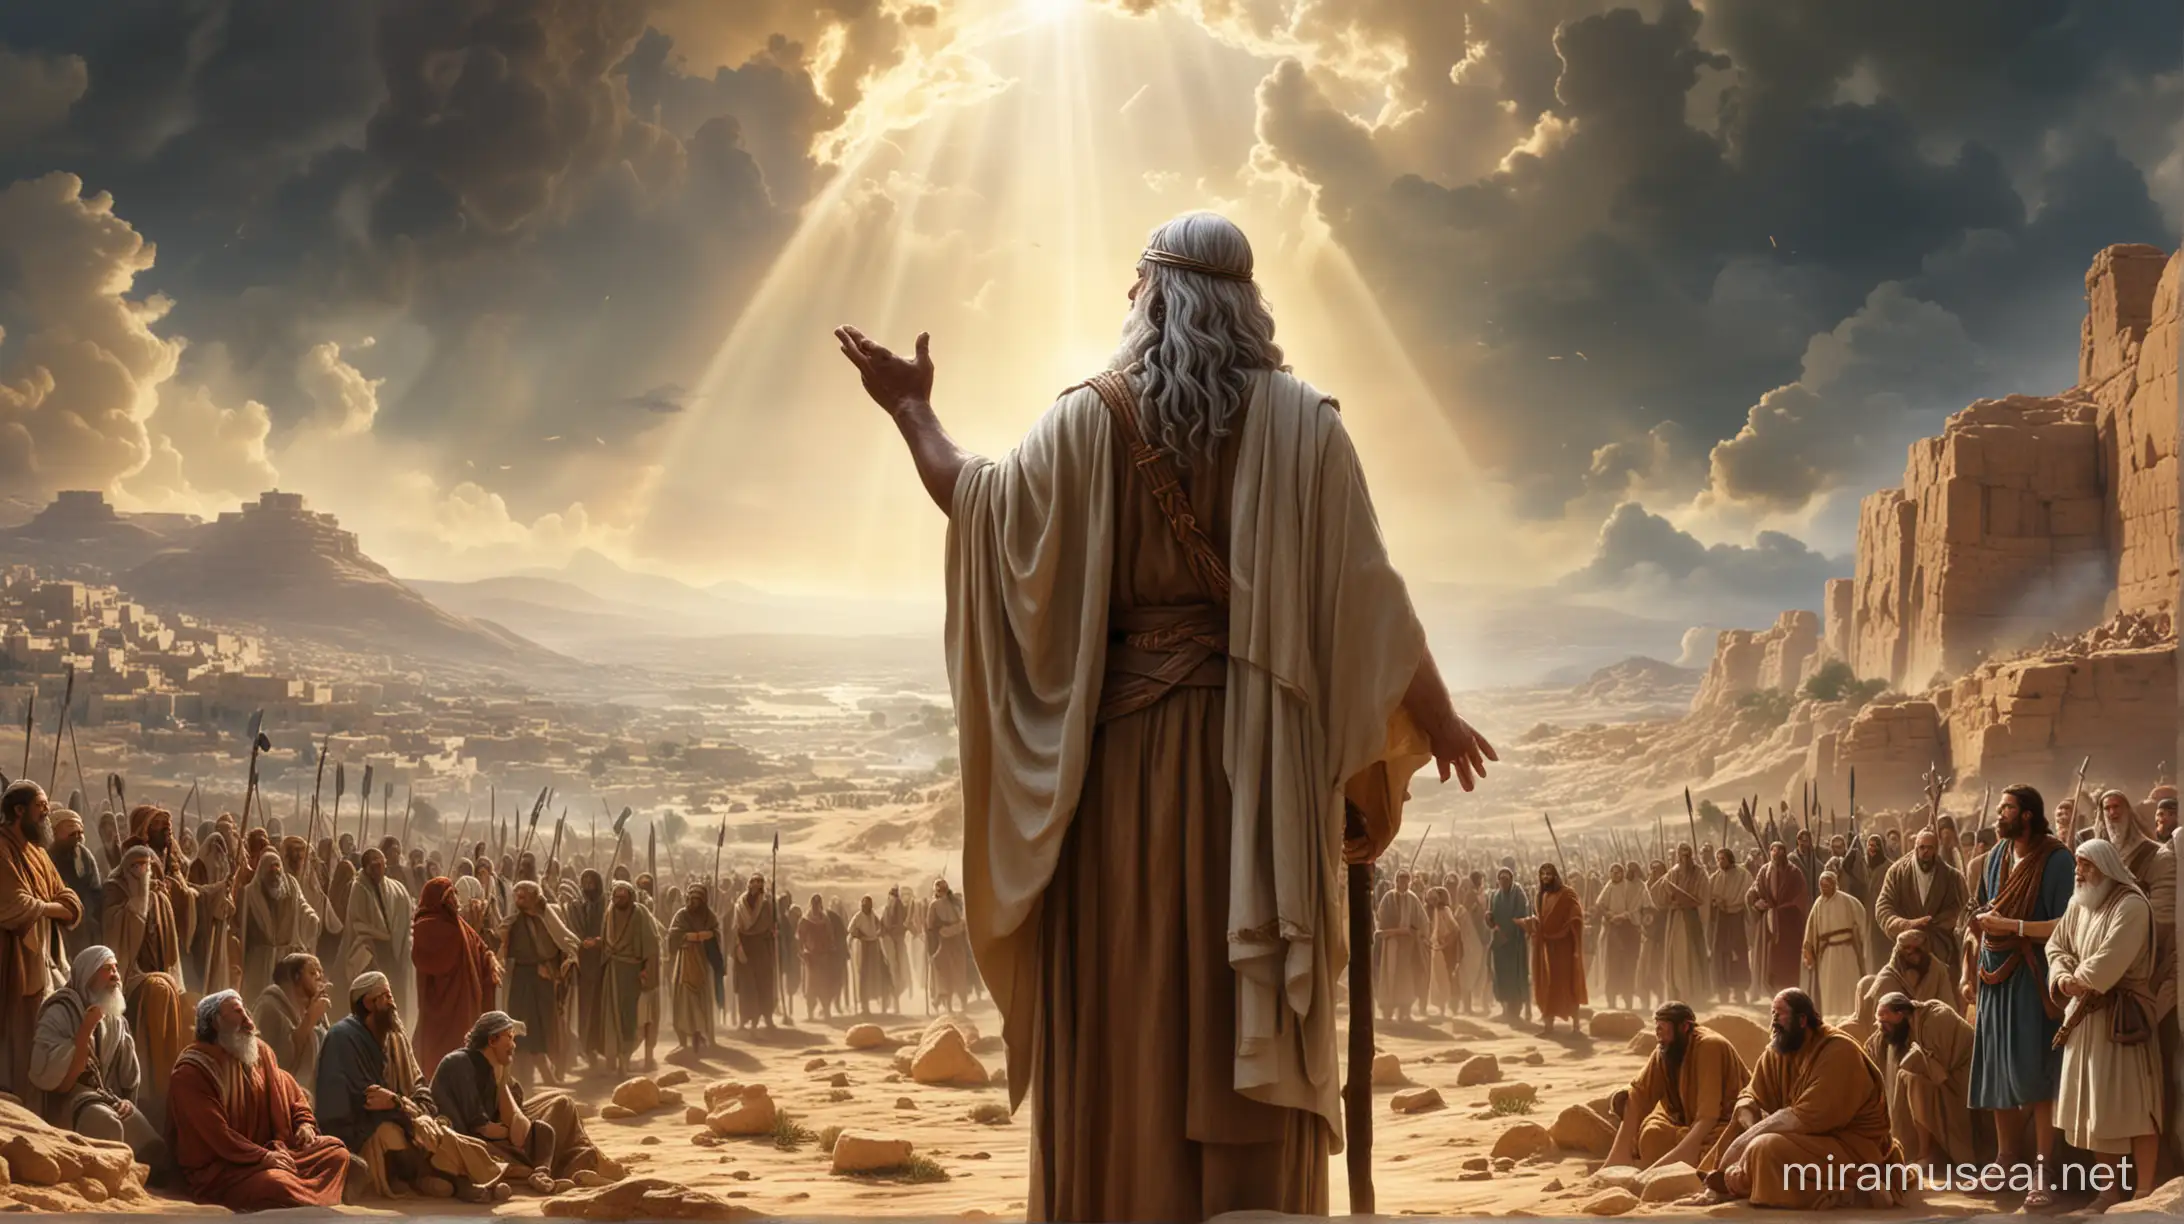 Divine Dialogue Moses and God Discuss the Fate of Israel